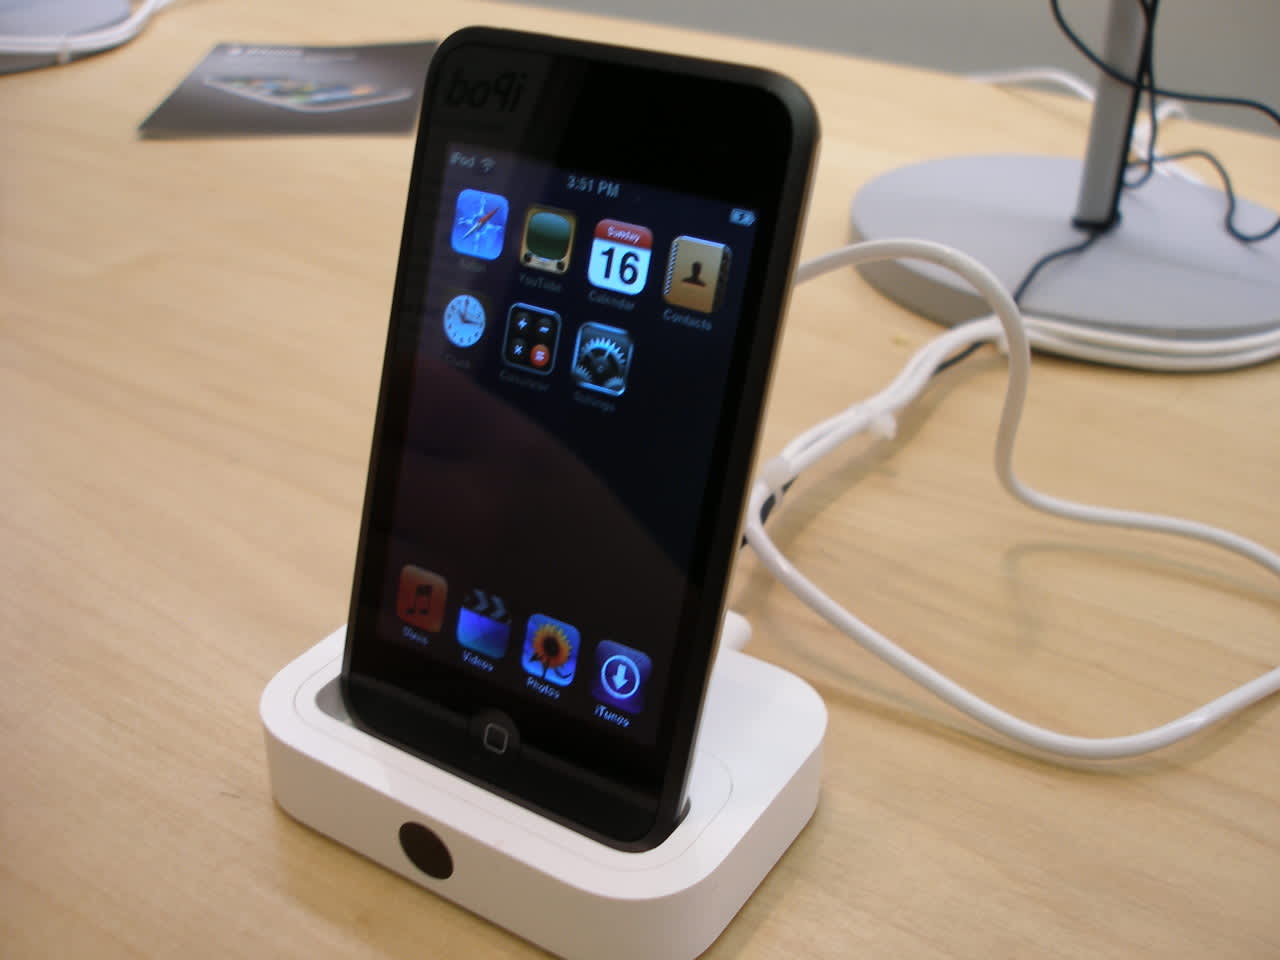 The Wilton Police Department has two iPod touch devices in their lost and found box.